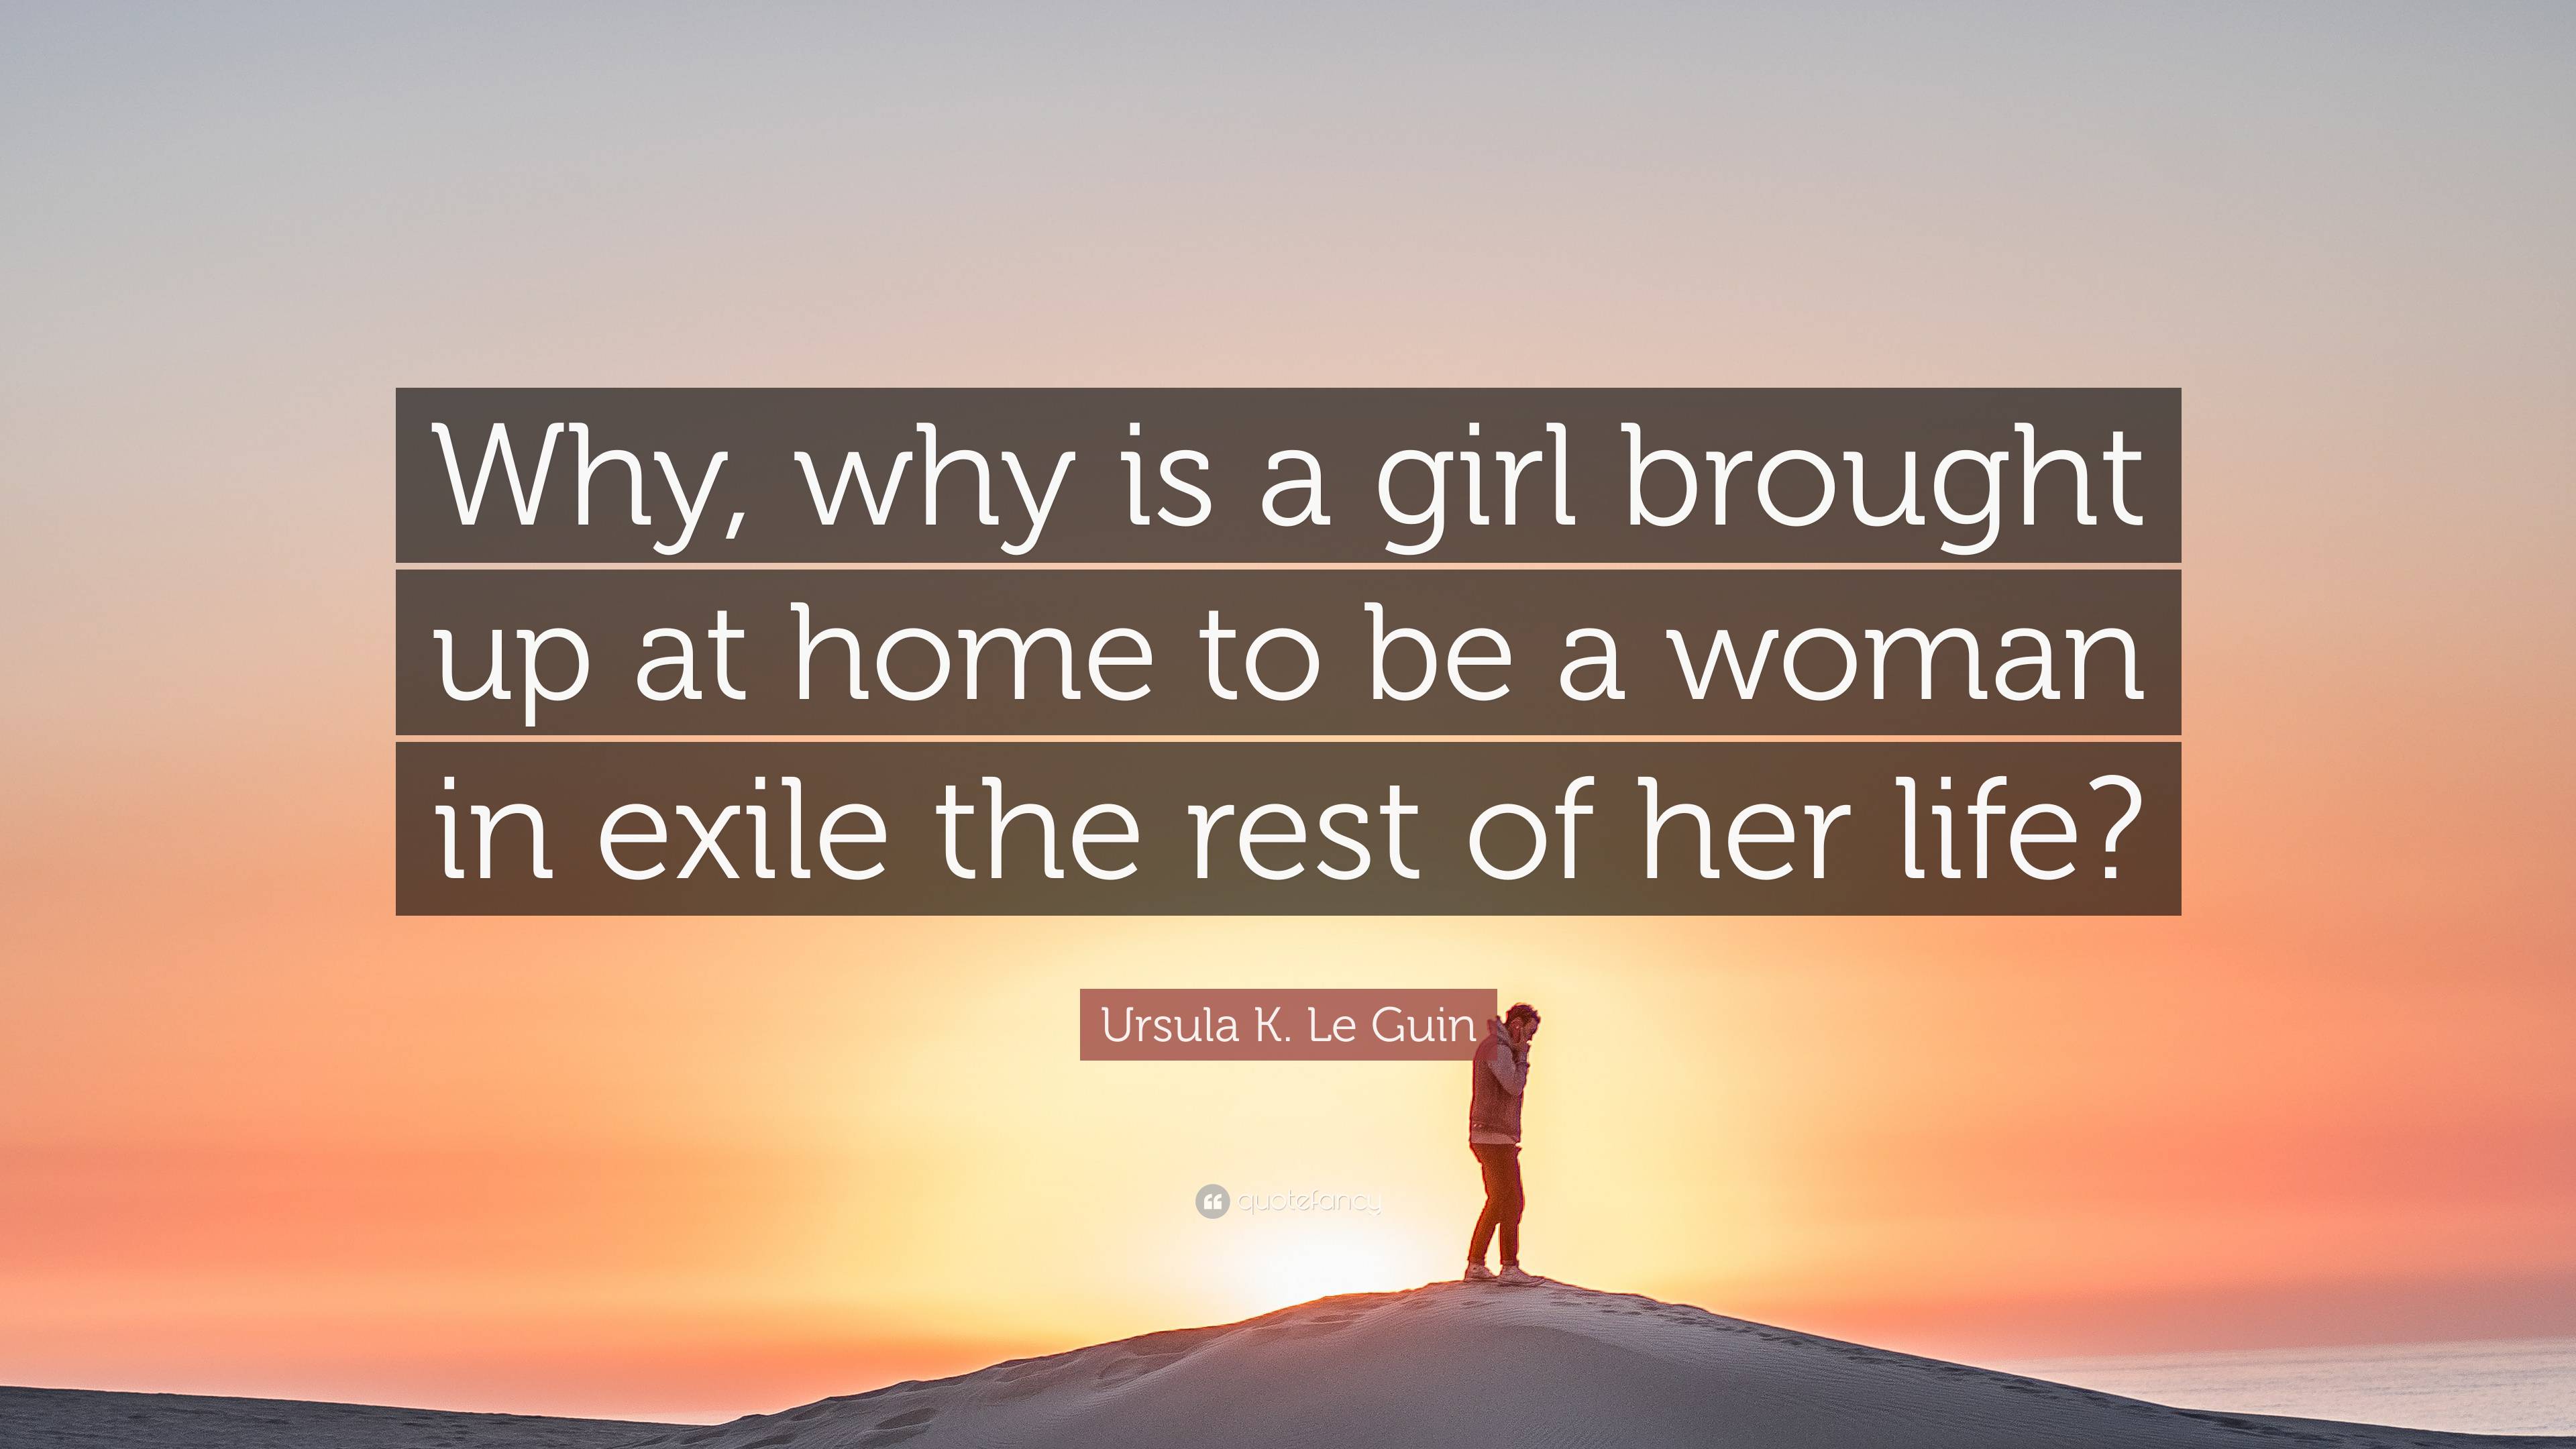 Ursula K. Le Guin Quote: “Why, why is a girl brought up at home to be a ...